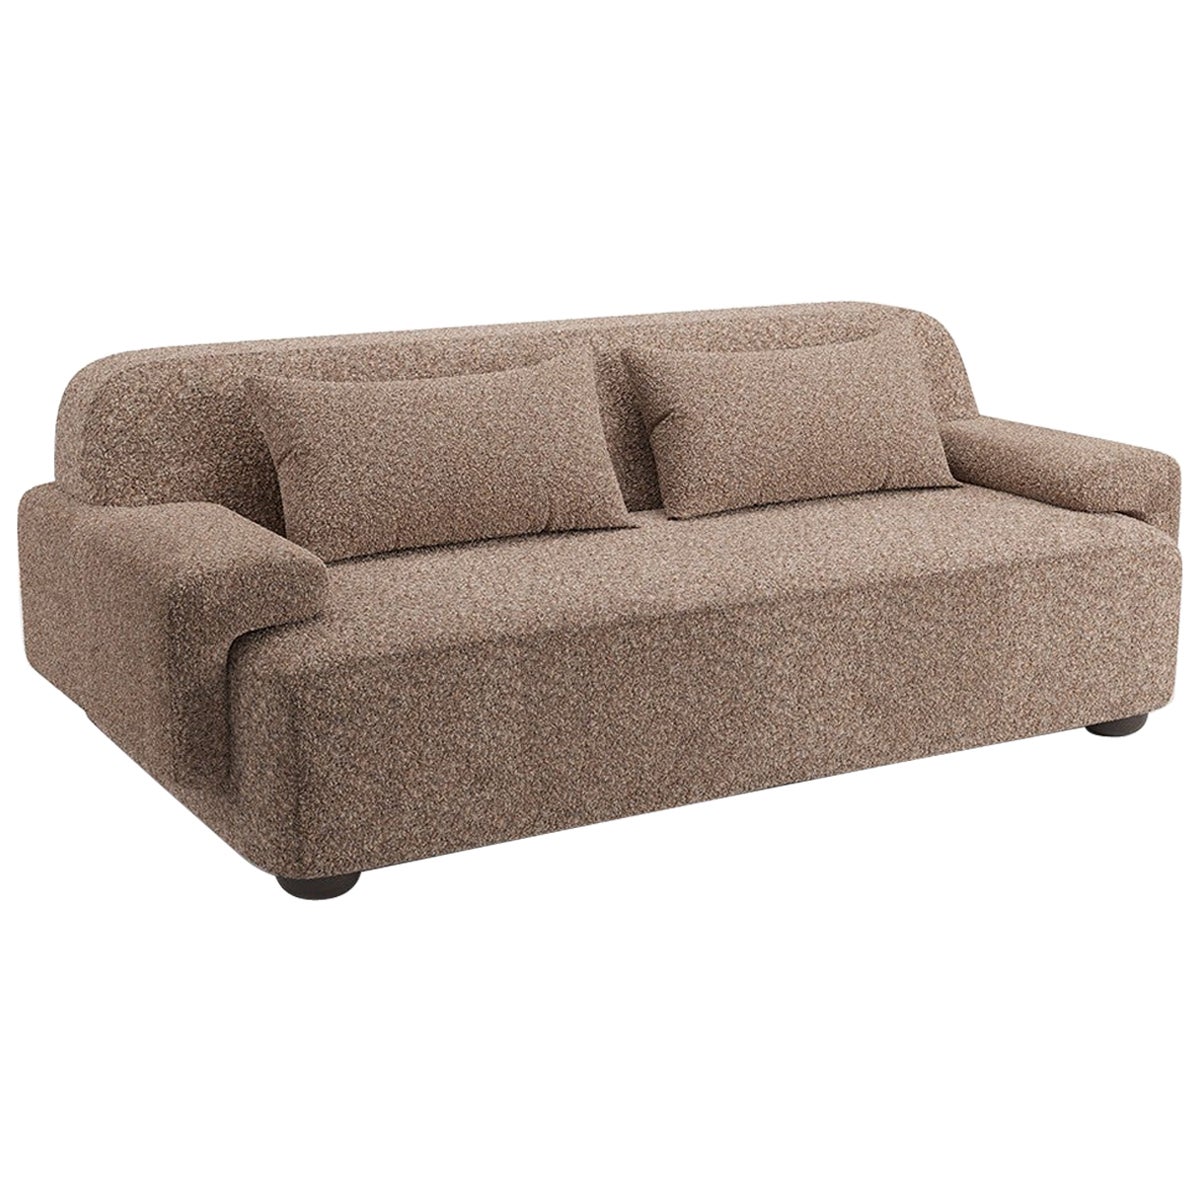 Popus Editions Lena 4 Seater Sofa in Ciotello Athena Loop Yarn Upholstery For Sale